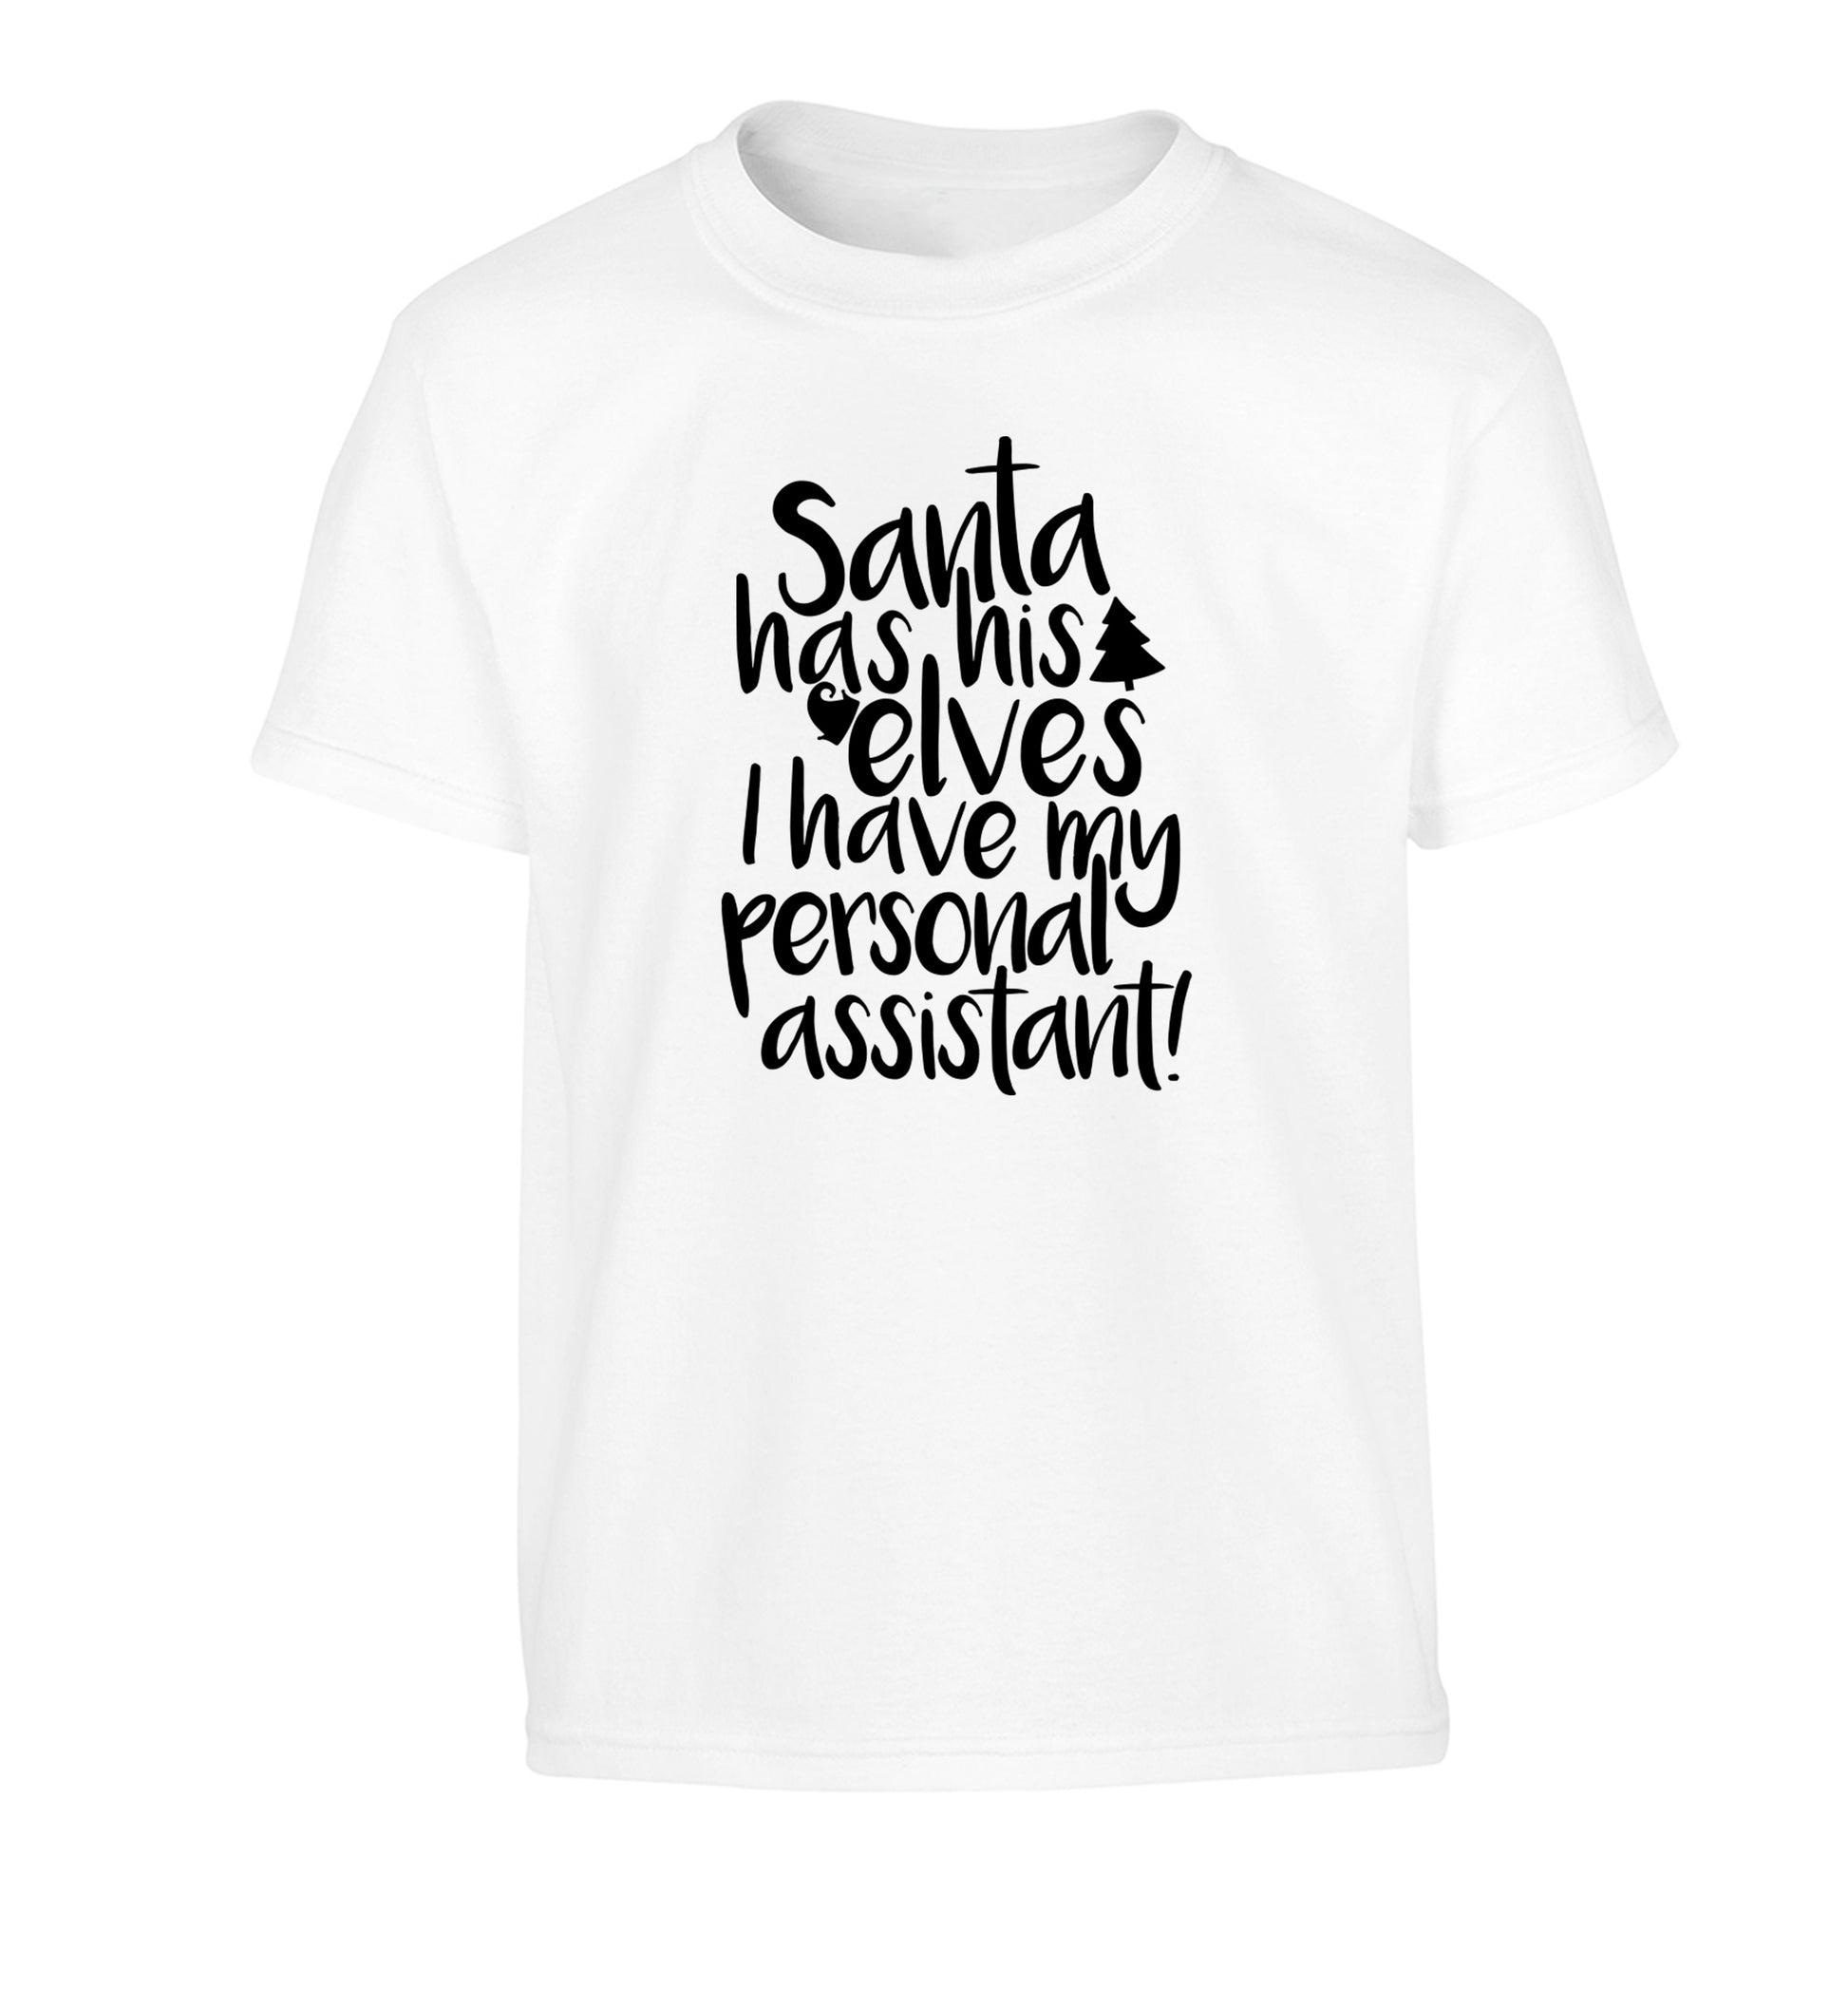 Santa has his elves I have my personal assistant Children's white Tshirt 12-14 Years